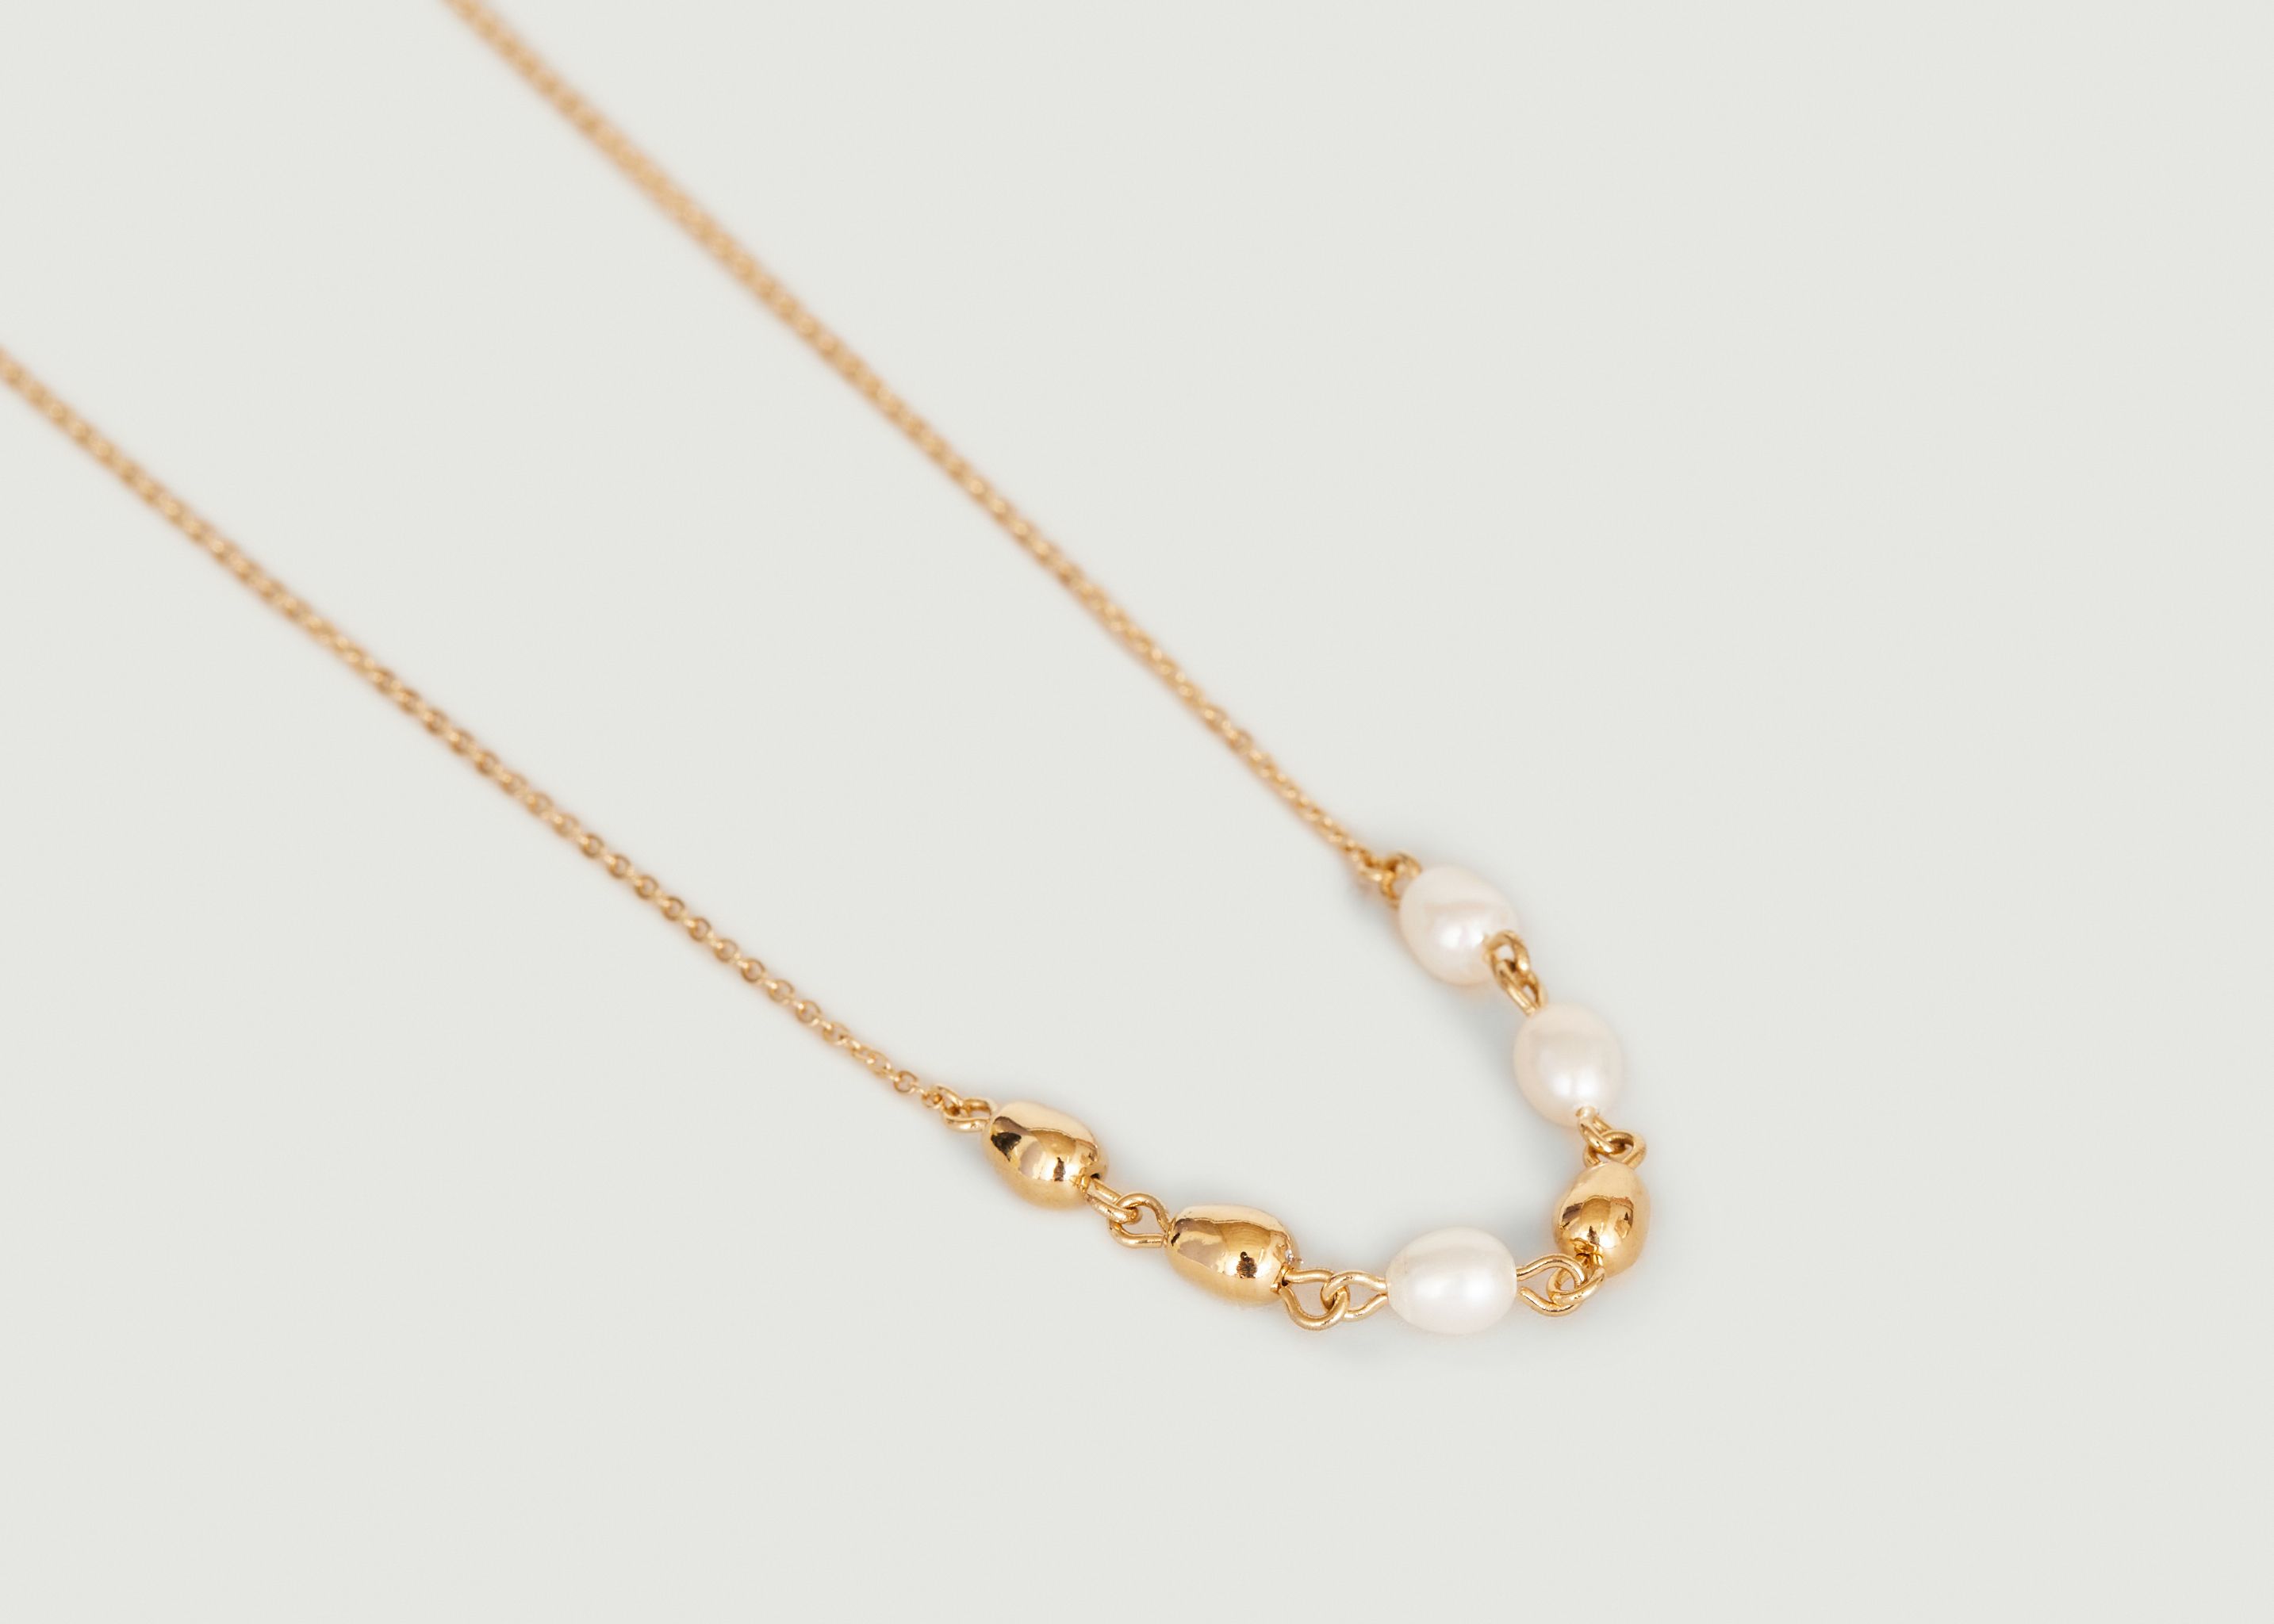 Lise chain necklace with pearls - Louise Damas